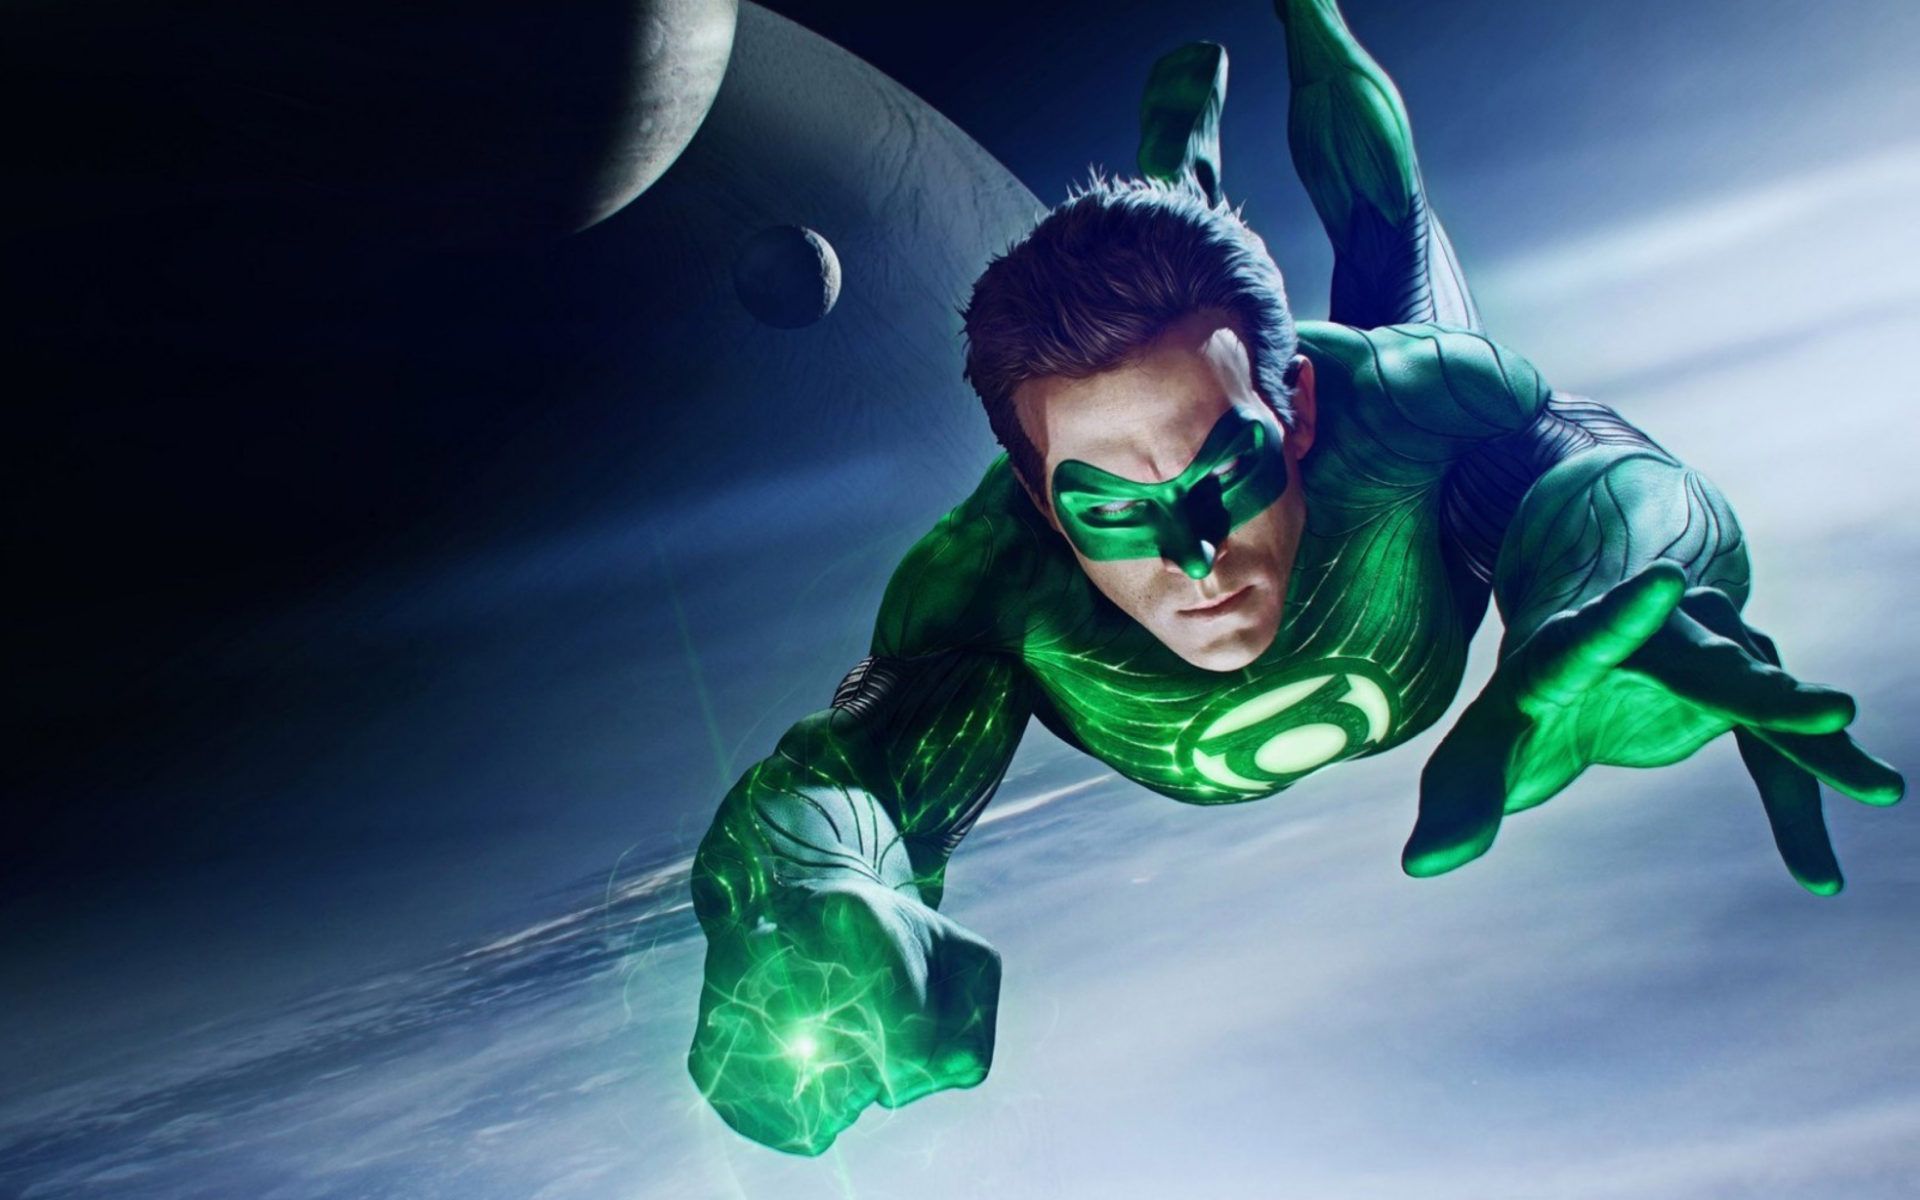 Green Lantern Superheroes In American Comic Books By Dc Comics Fighter For Justice Wallpaper 4k iPhone And Pc 3840x2400, Wallpaper13.com